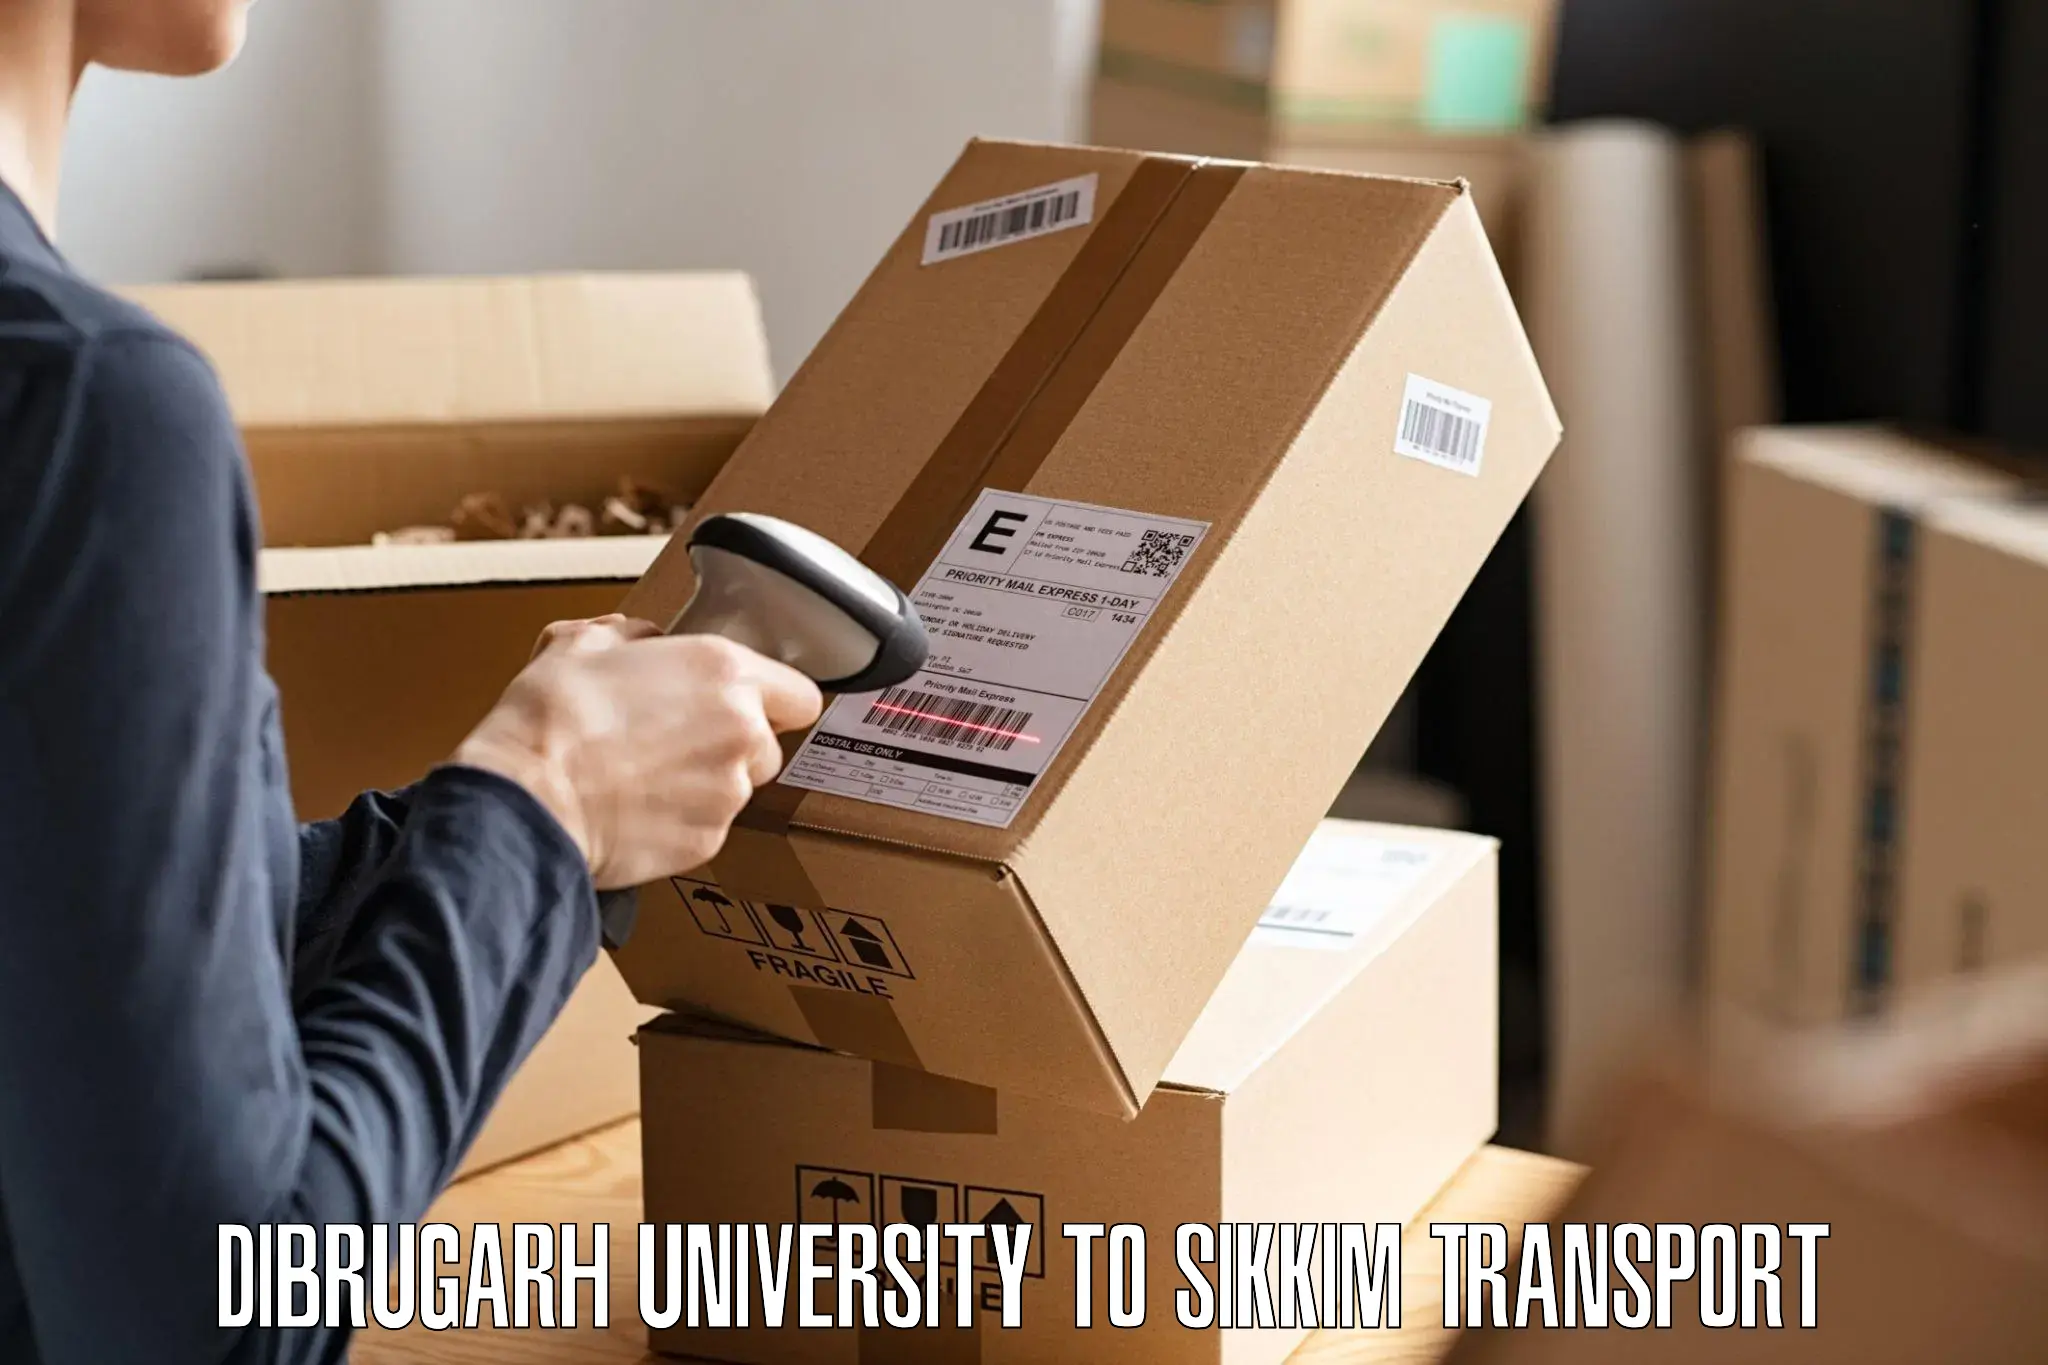 Container transport service Dibrugarh University to East Sikkim